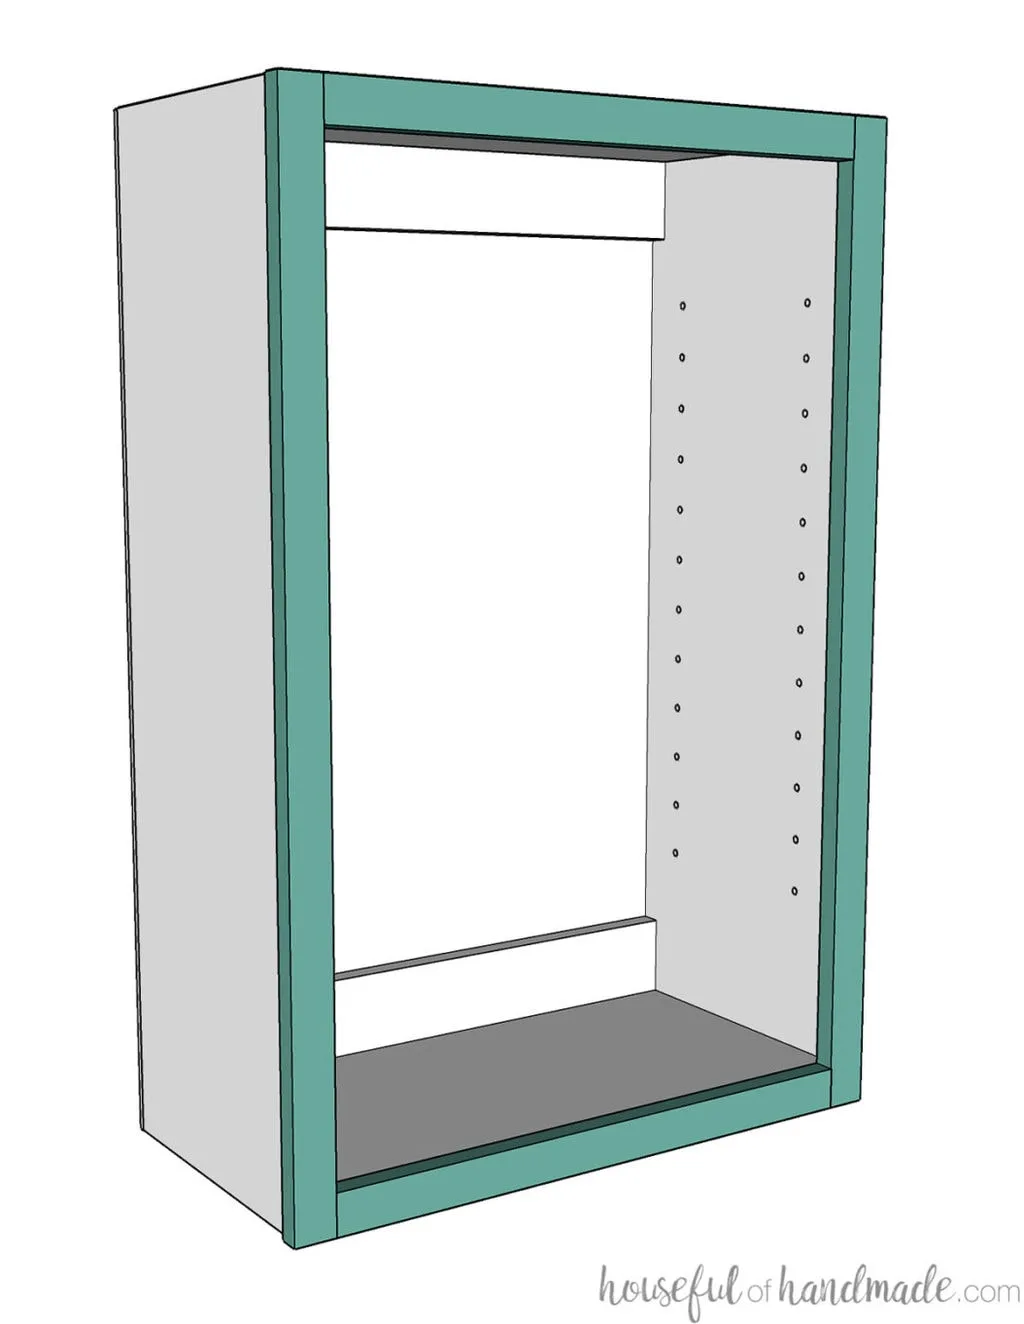 3D drawing of wall cabinet with holes for shelf pins in the side.